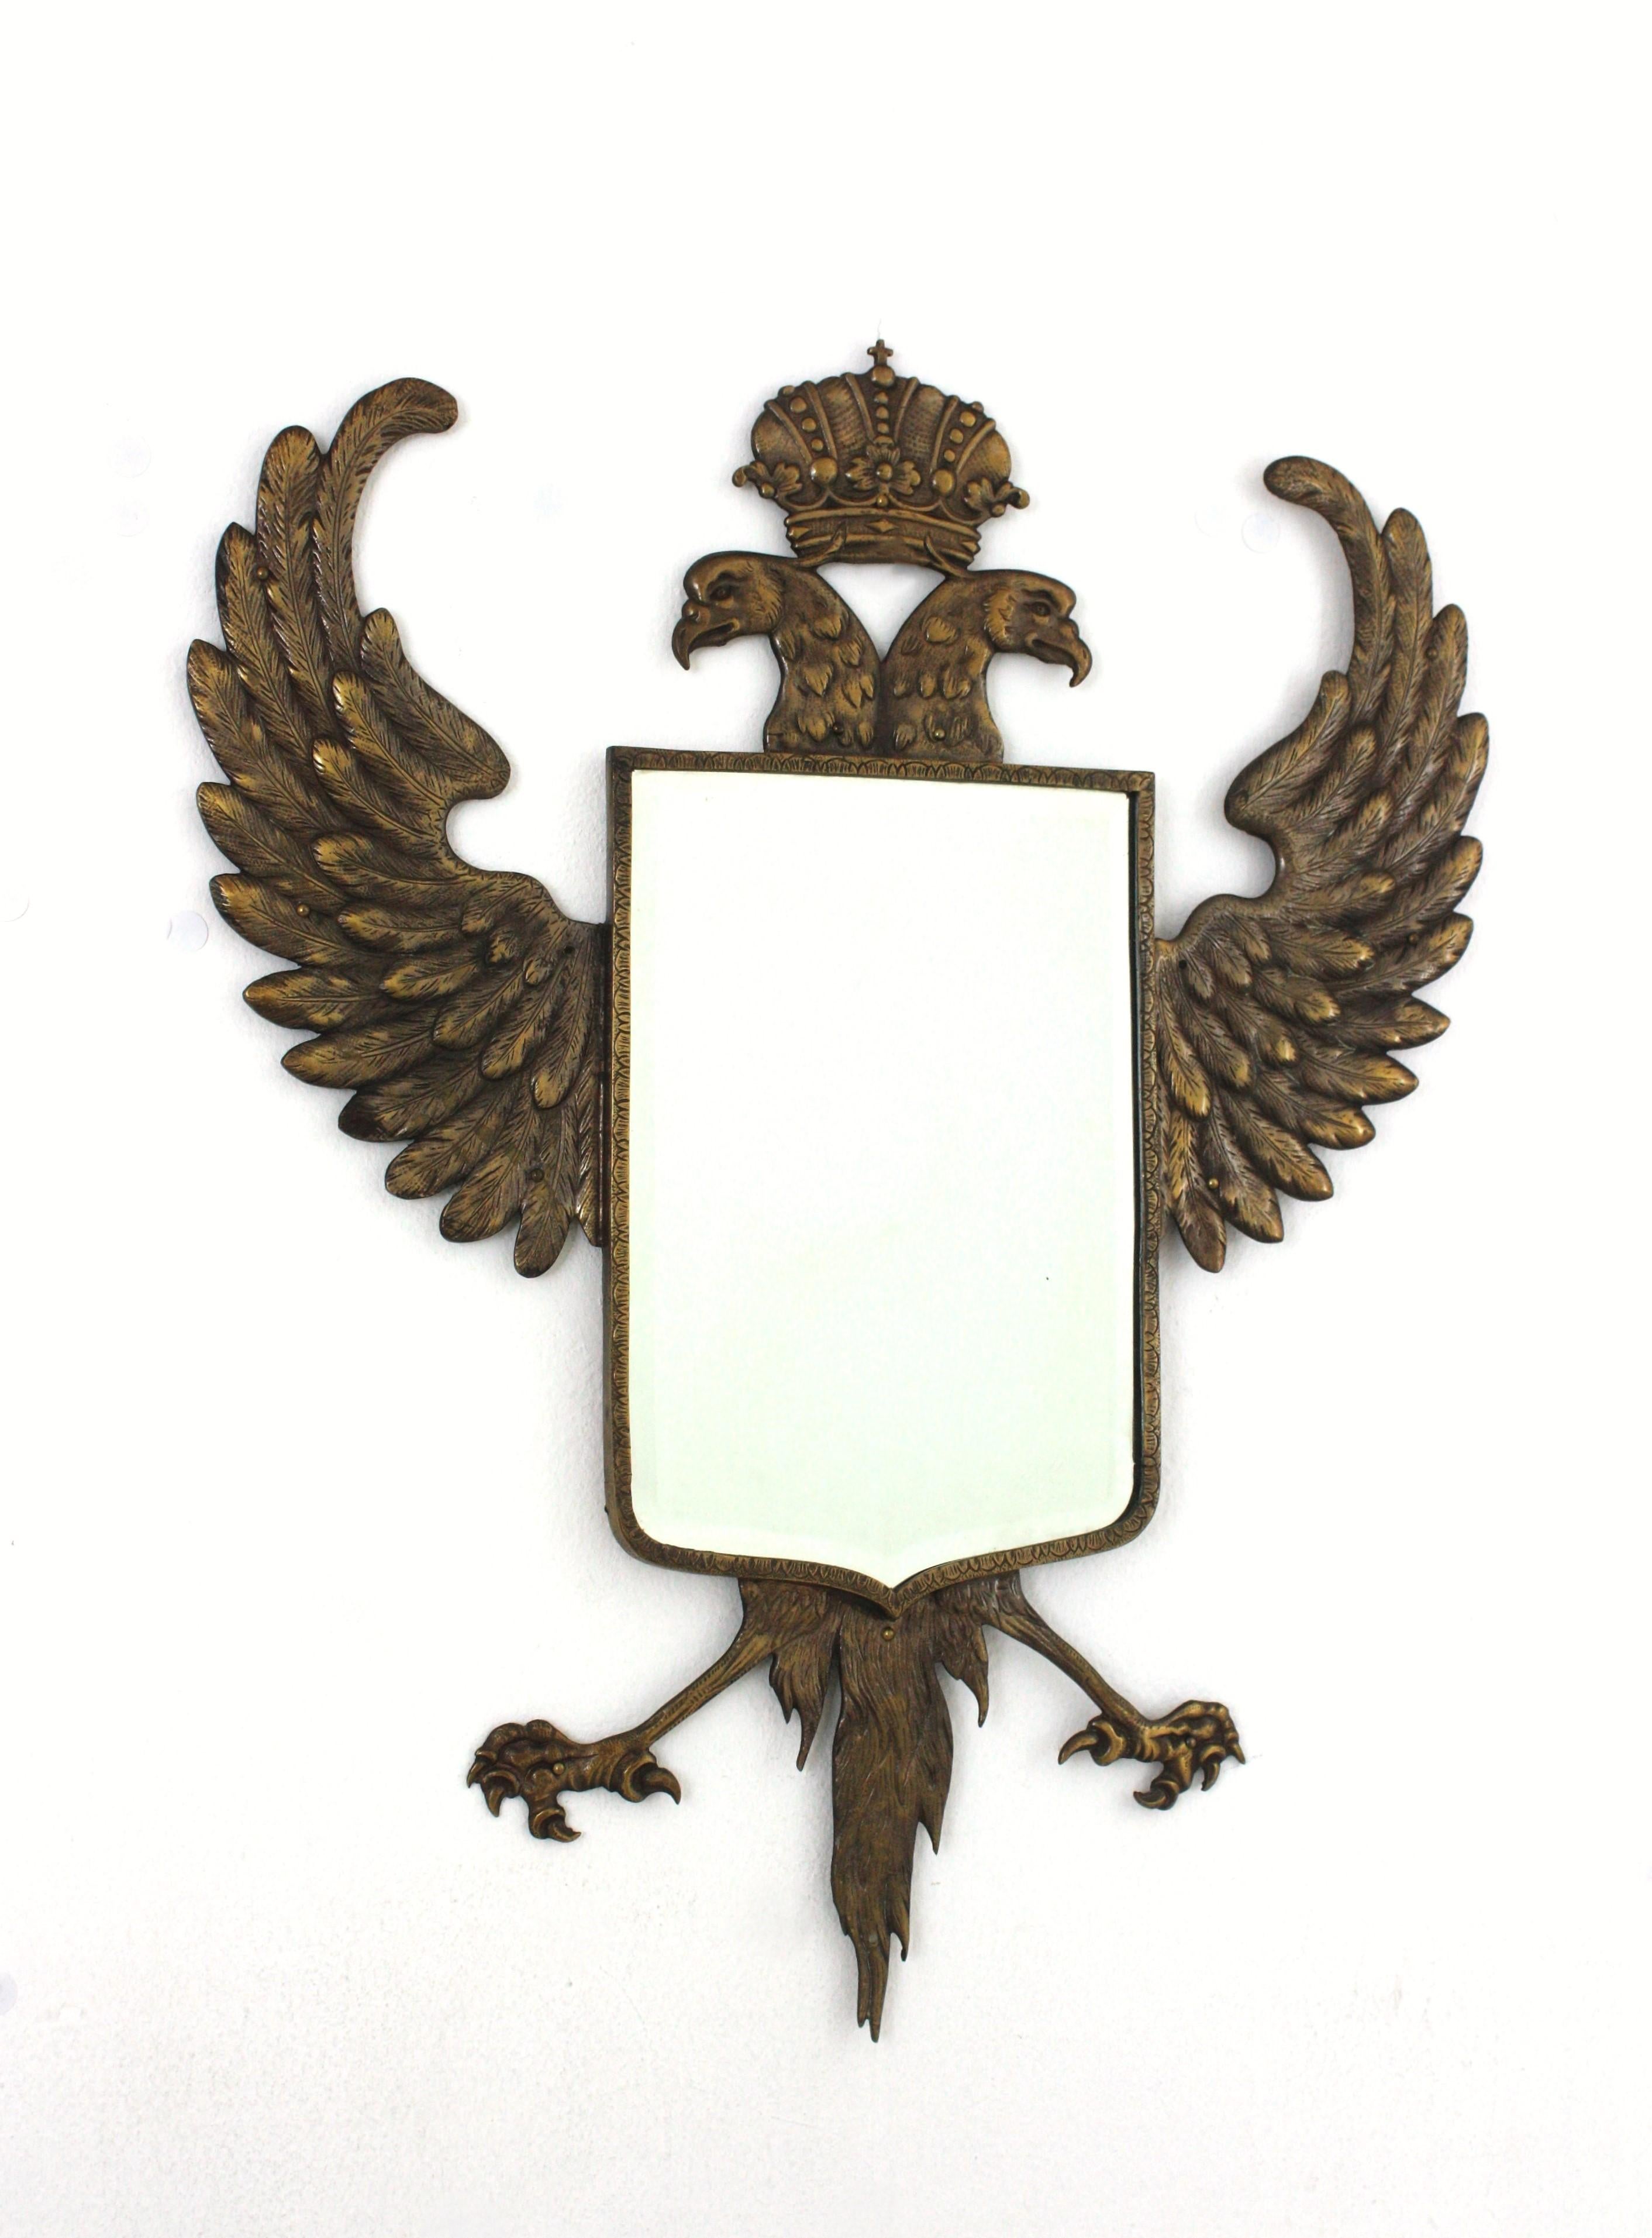 Two Headed Eagle Bronze Wall Mirror, Spain, 1930s-1940s.
Spectacular bronze wall mirror with a crowned double headed eagle surrounding a shield shaped beveled glass.
This bronze mirror features a double headed eagle with wide open wings and a crown